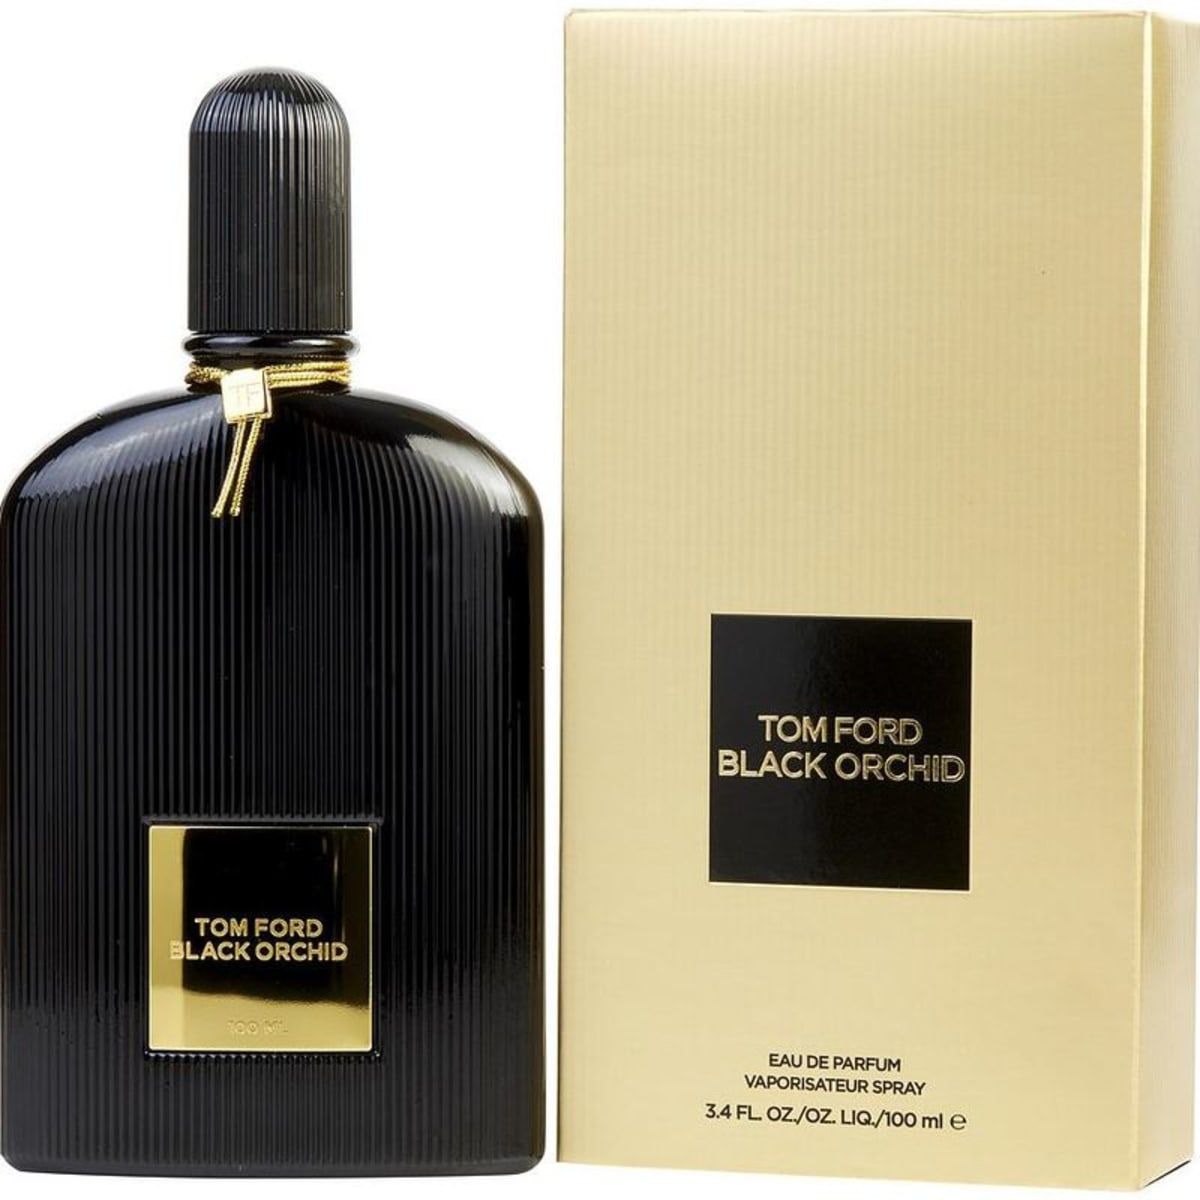 Top 50+ imagen tom ford black orchid - Abzlocal.mx